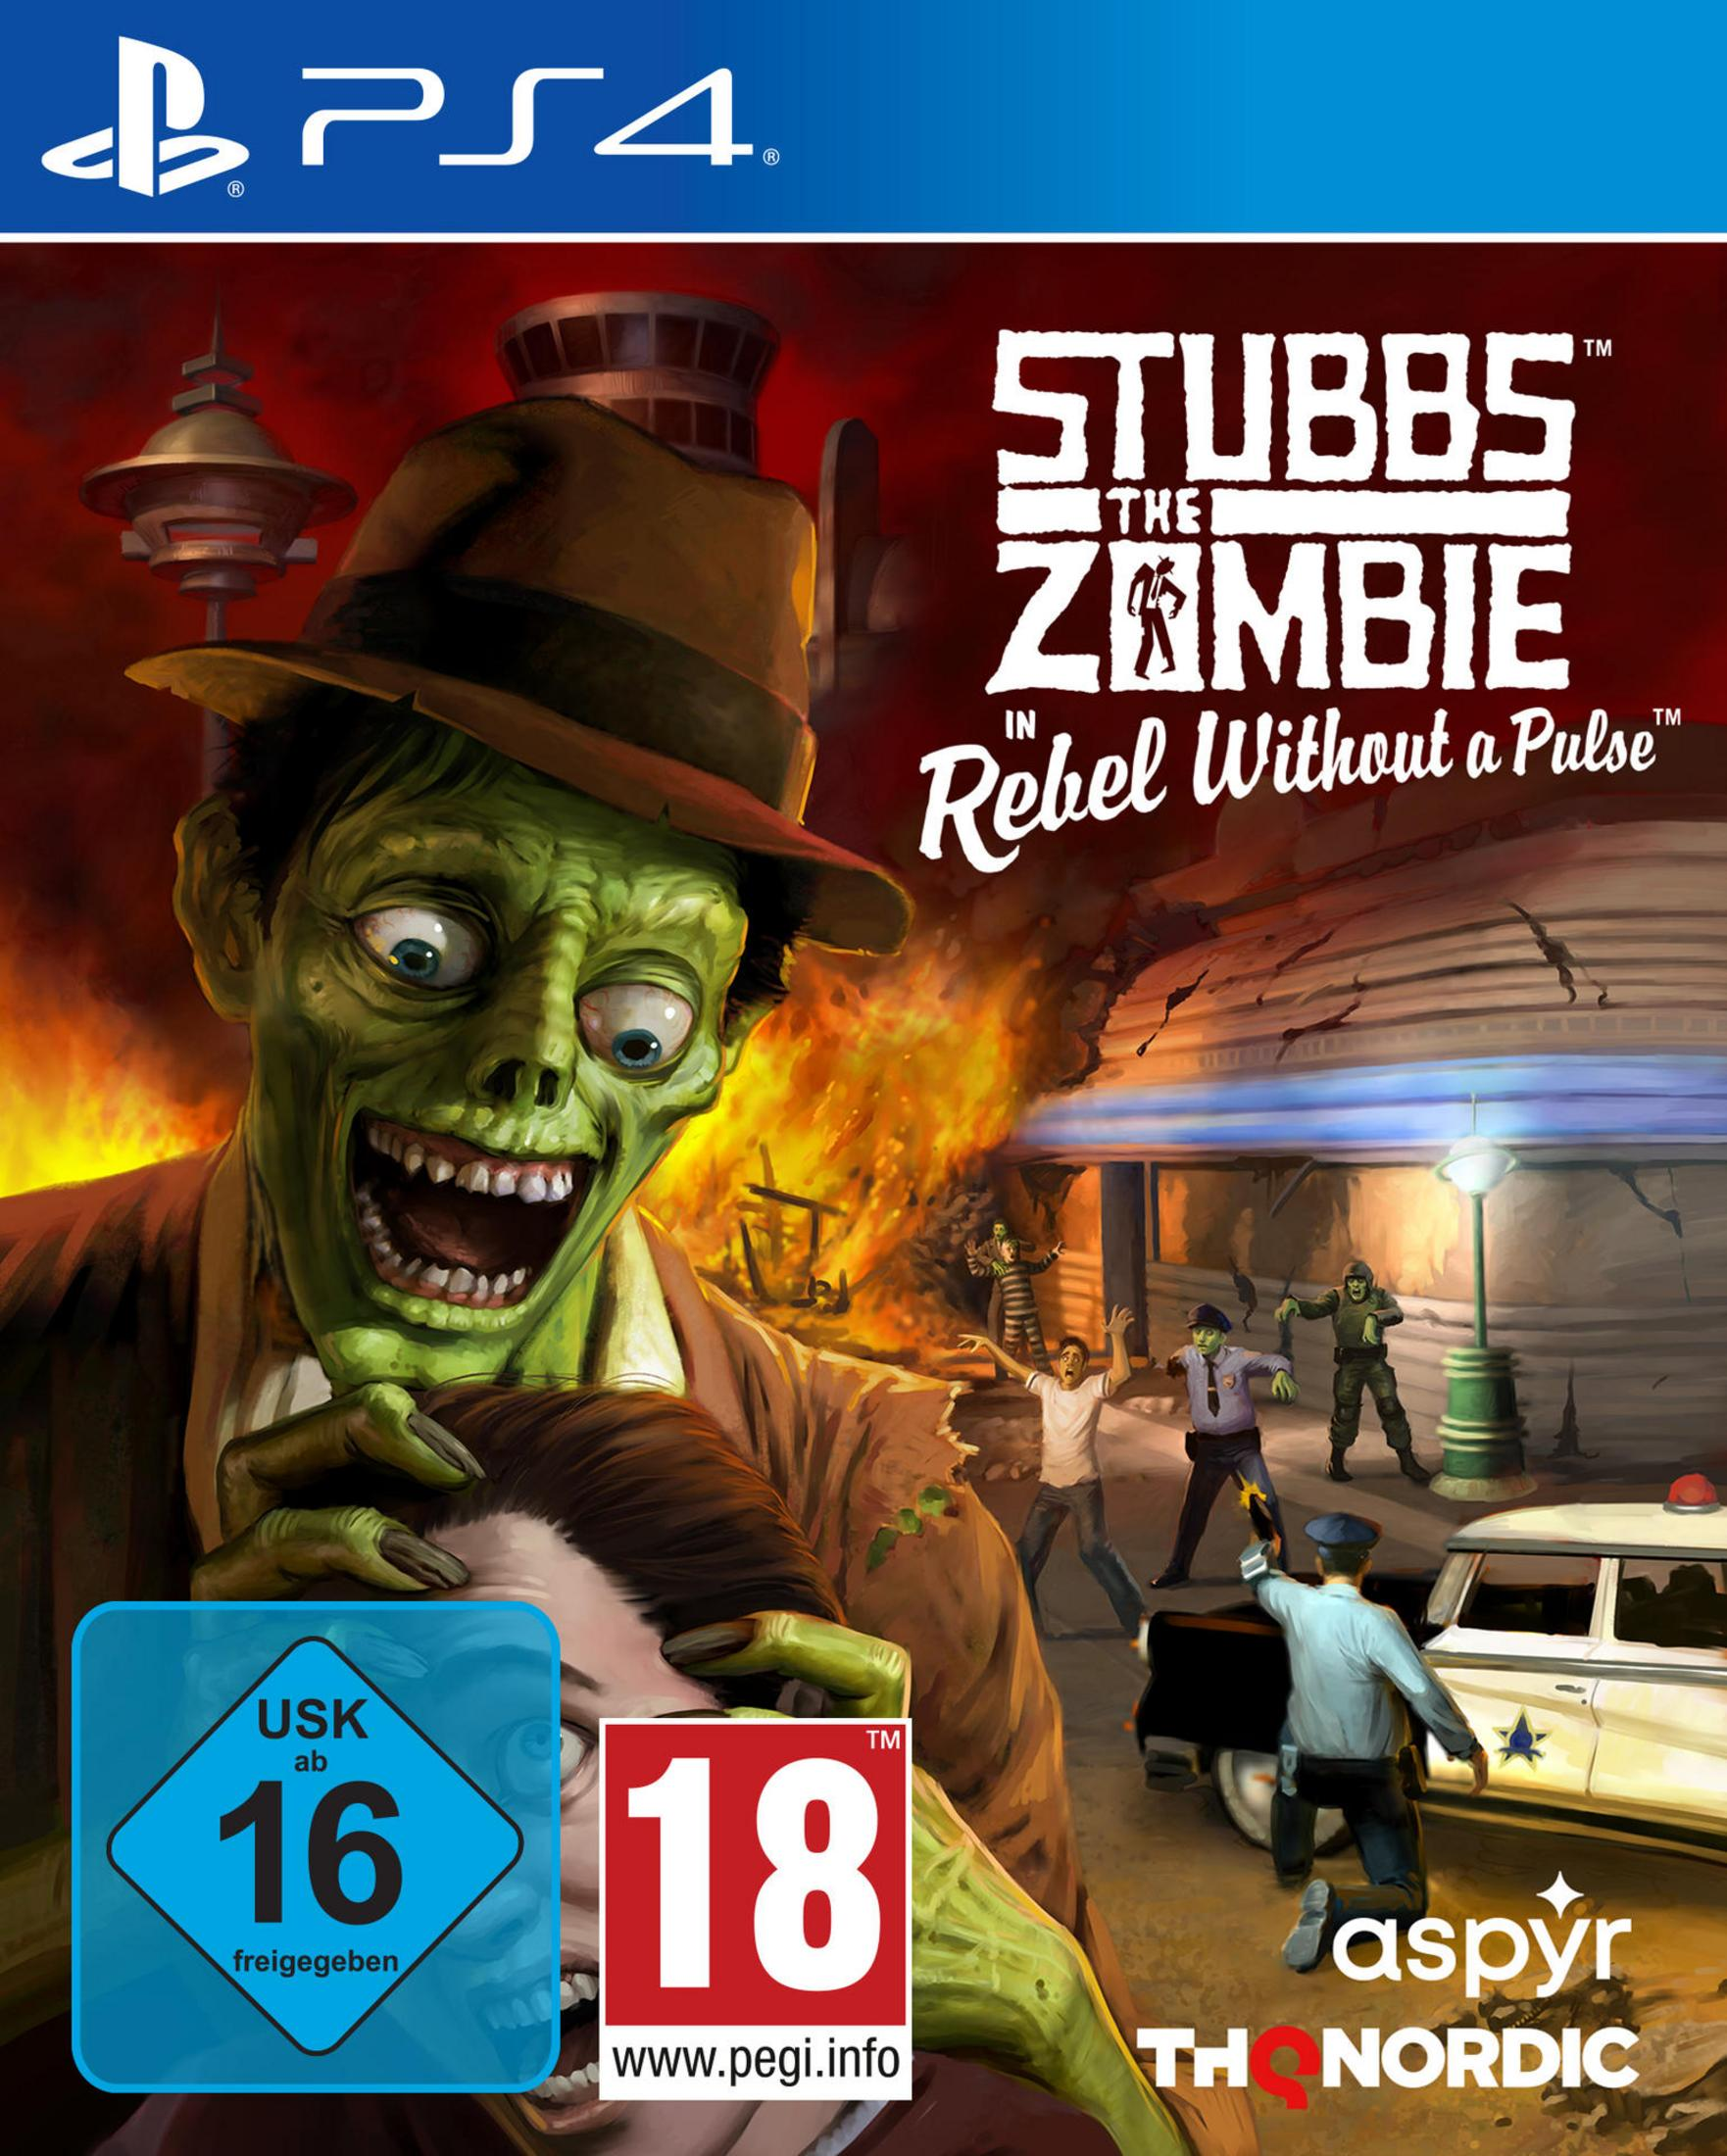 Stubbs the Zombie PS-4 4] [PlayStation Rebel Pulse a - Without in